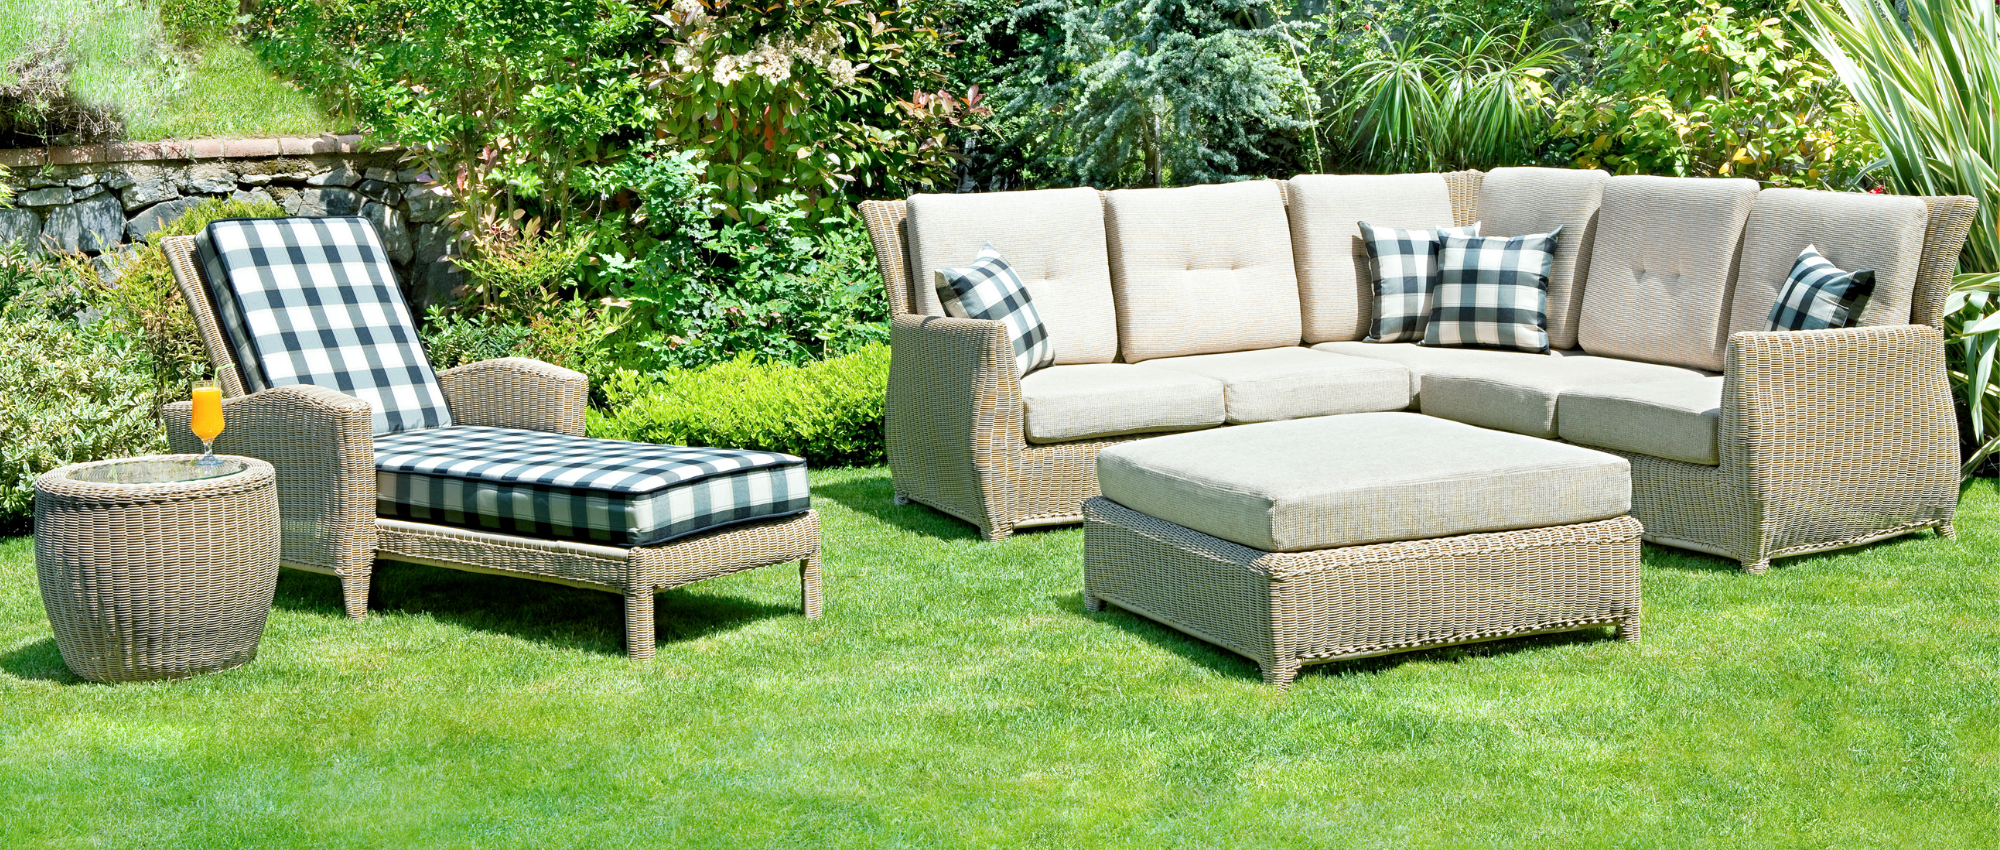 Why You Should Invest in Outdoor Furniture